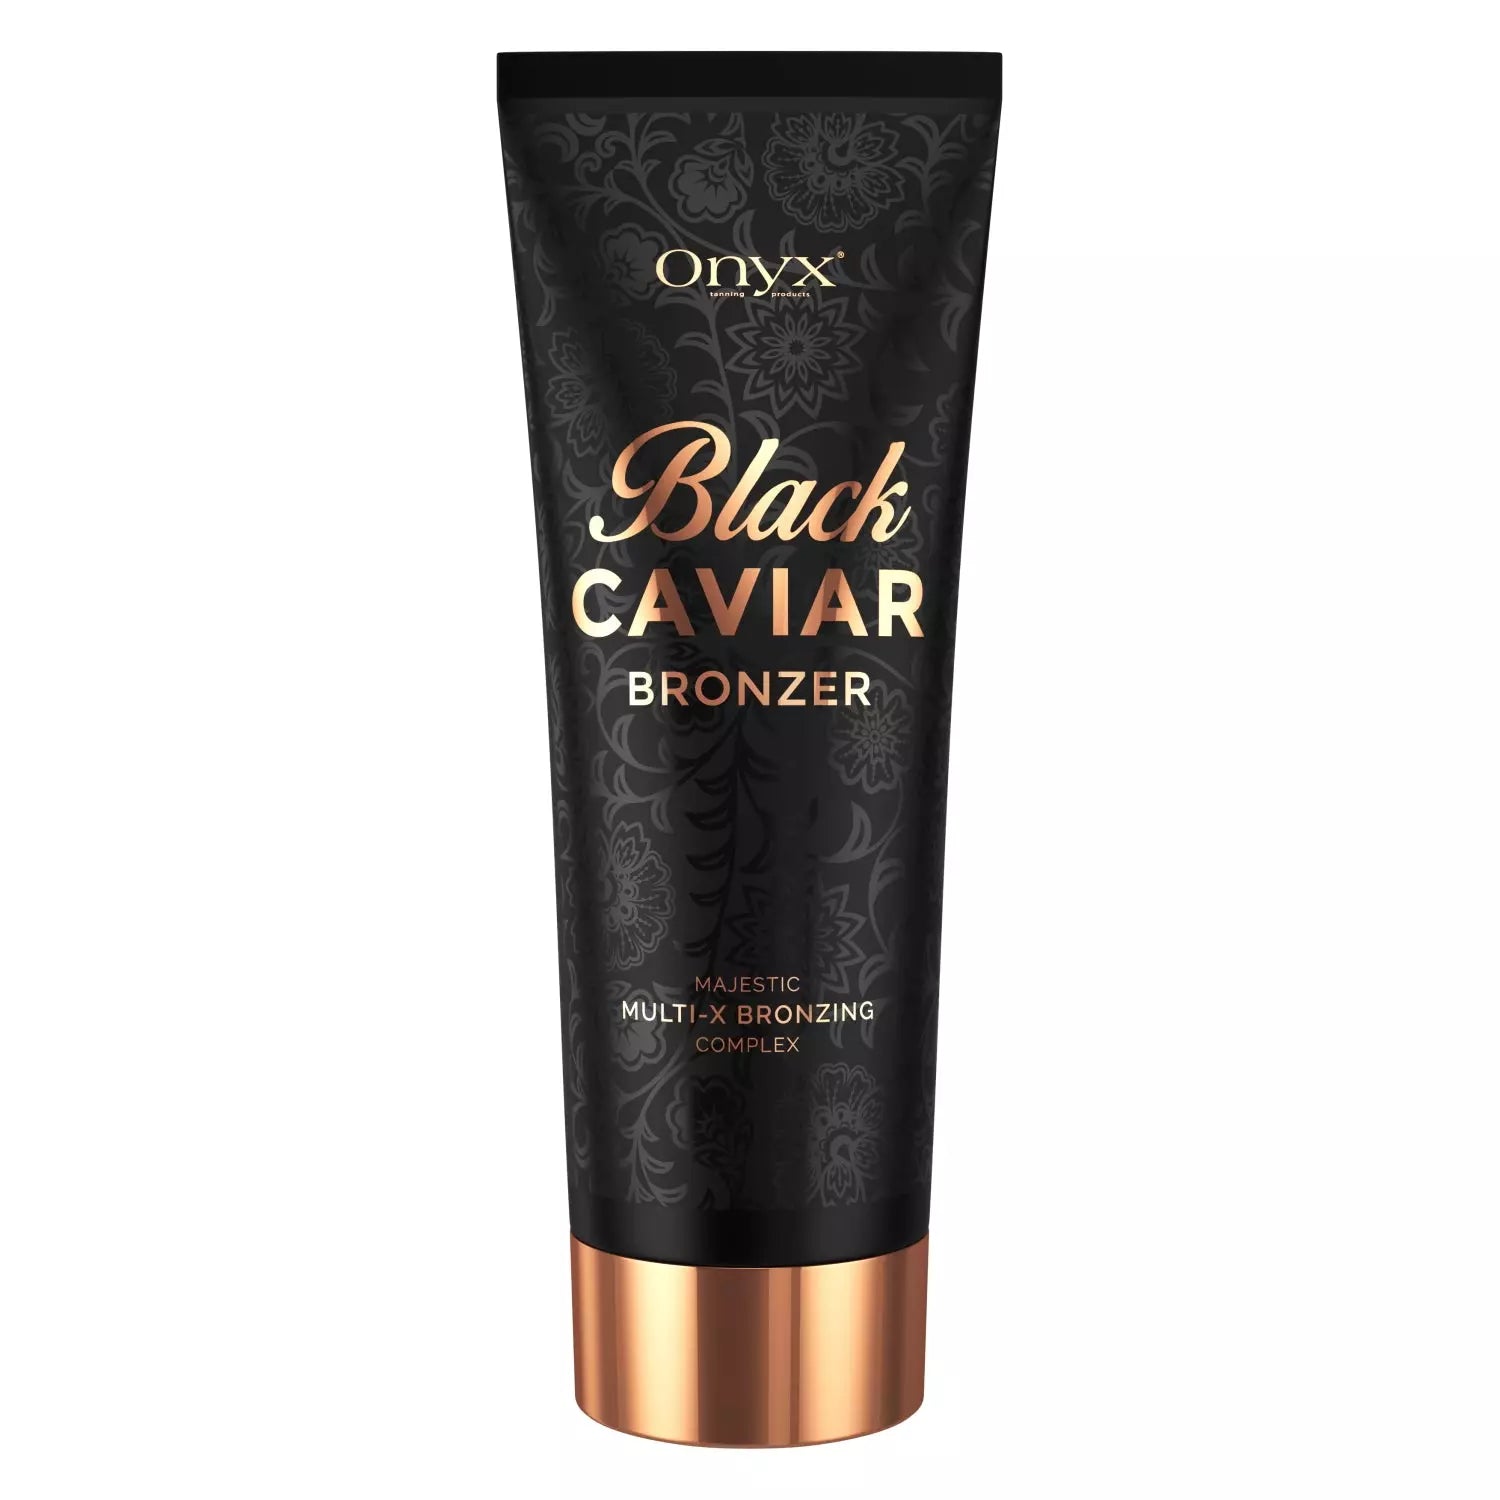 Black Caviar bronzer tanning lotion for tanning beds